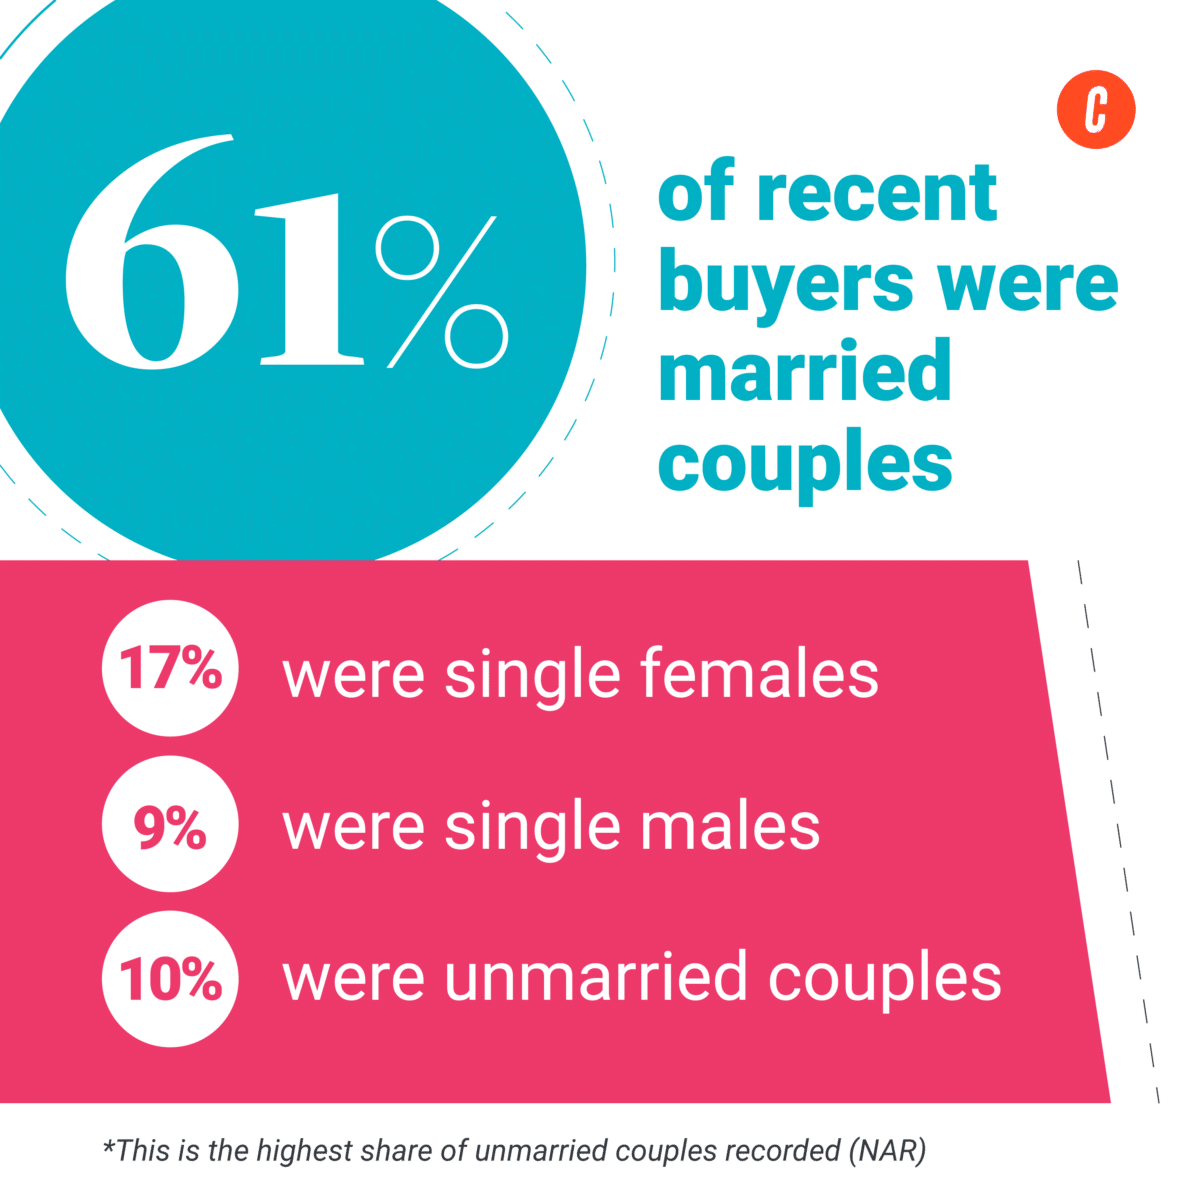 61 percent of recent homebuyers were married couples.